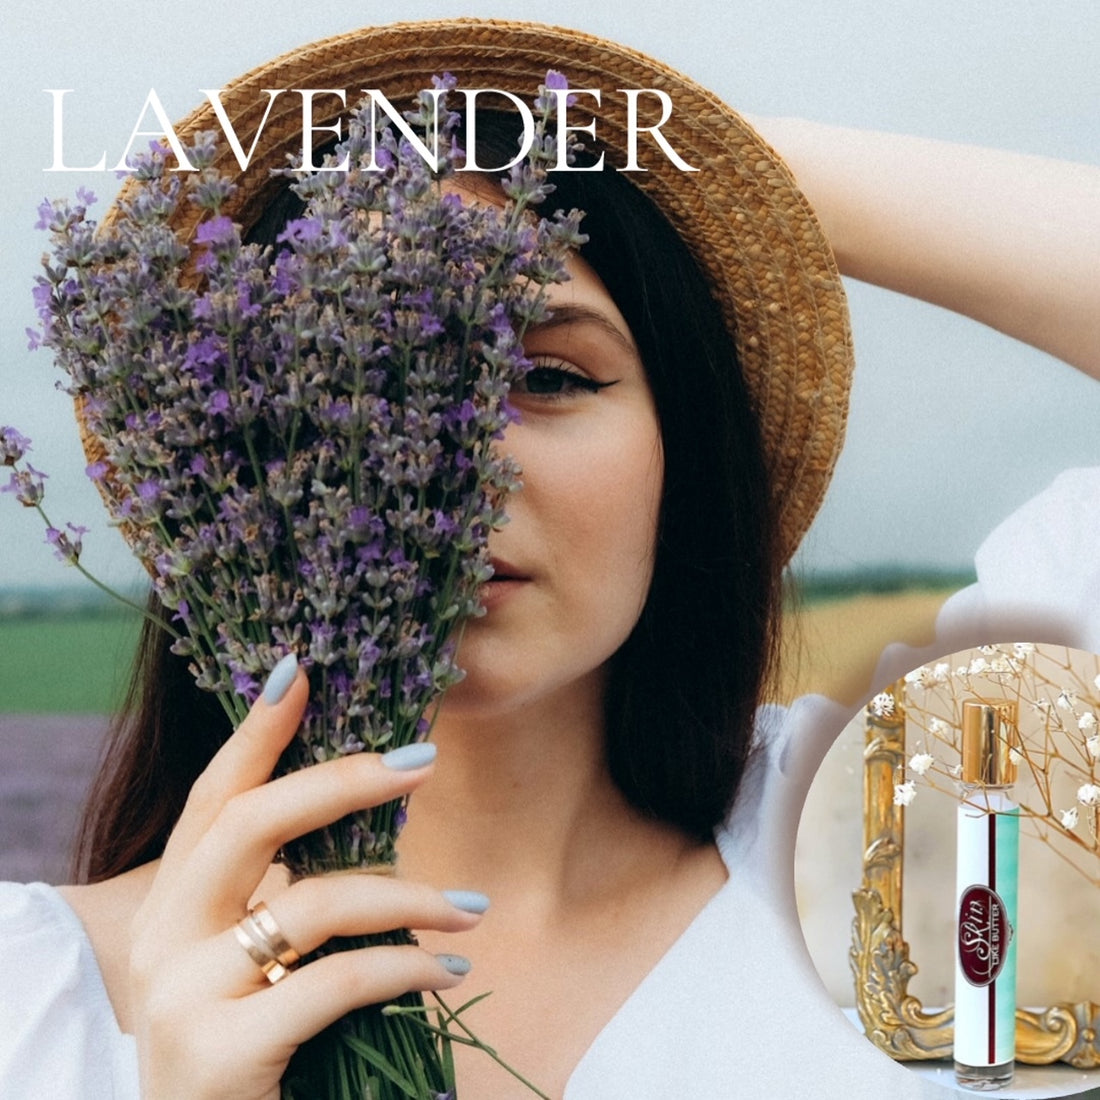 LAVENDER Roll on Perfume Sale! ~ Buy 1 get one 50% off-use coupon code 2PLEASE